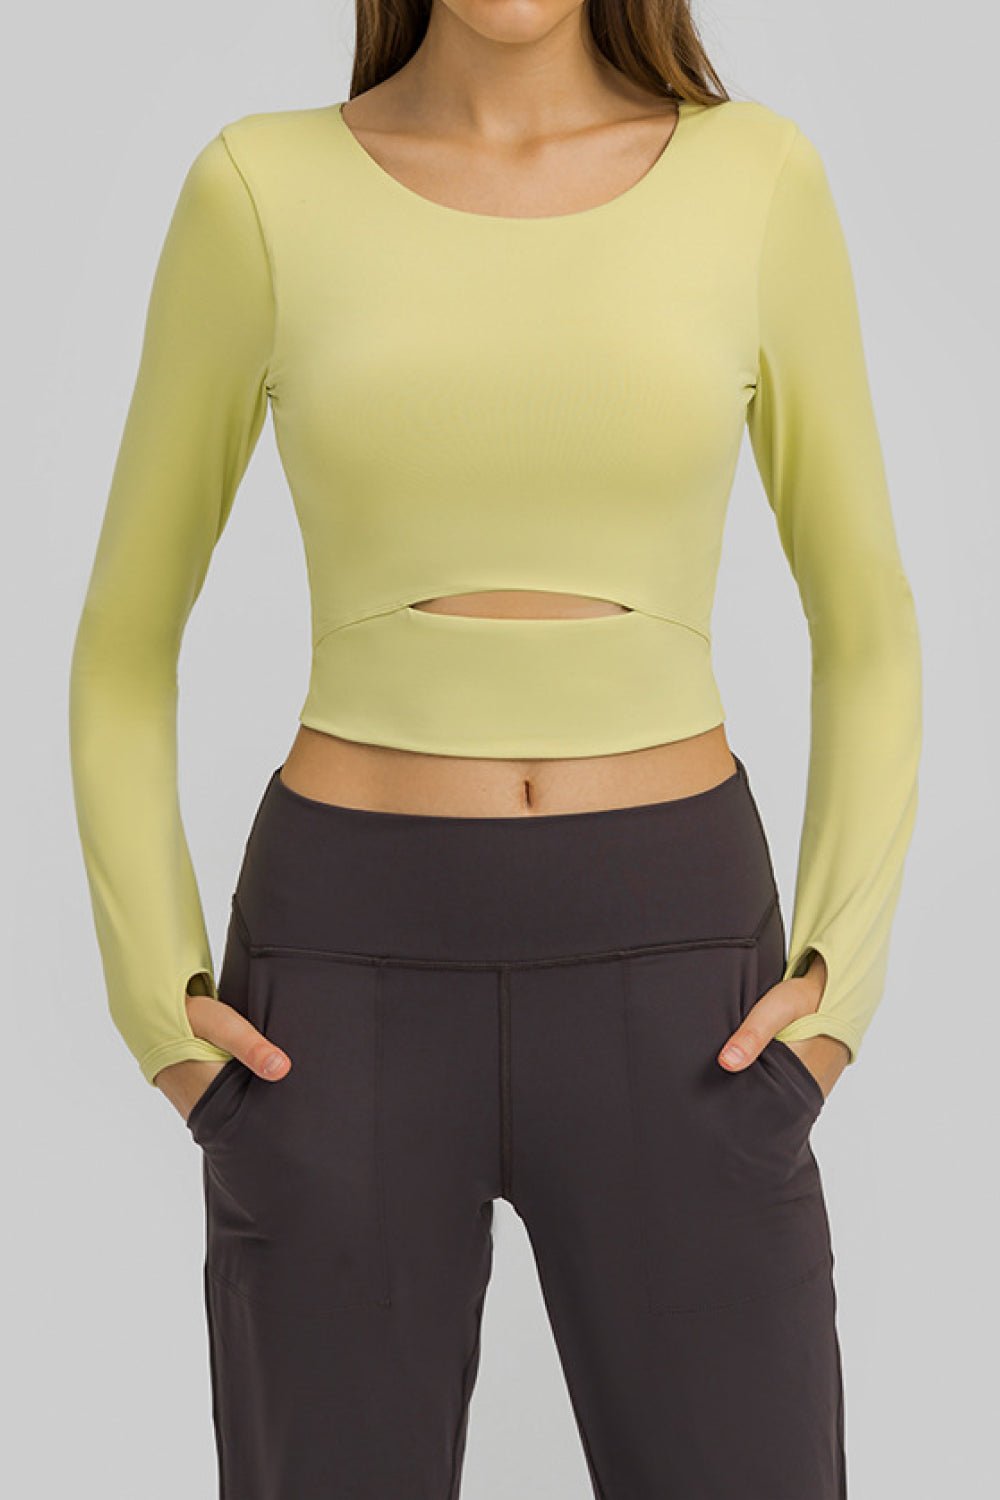 Cut Out Front Crop Yoga Tee - Mervyns